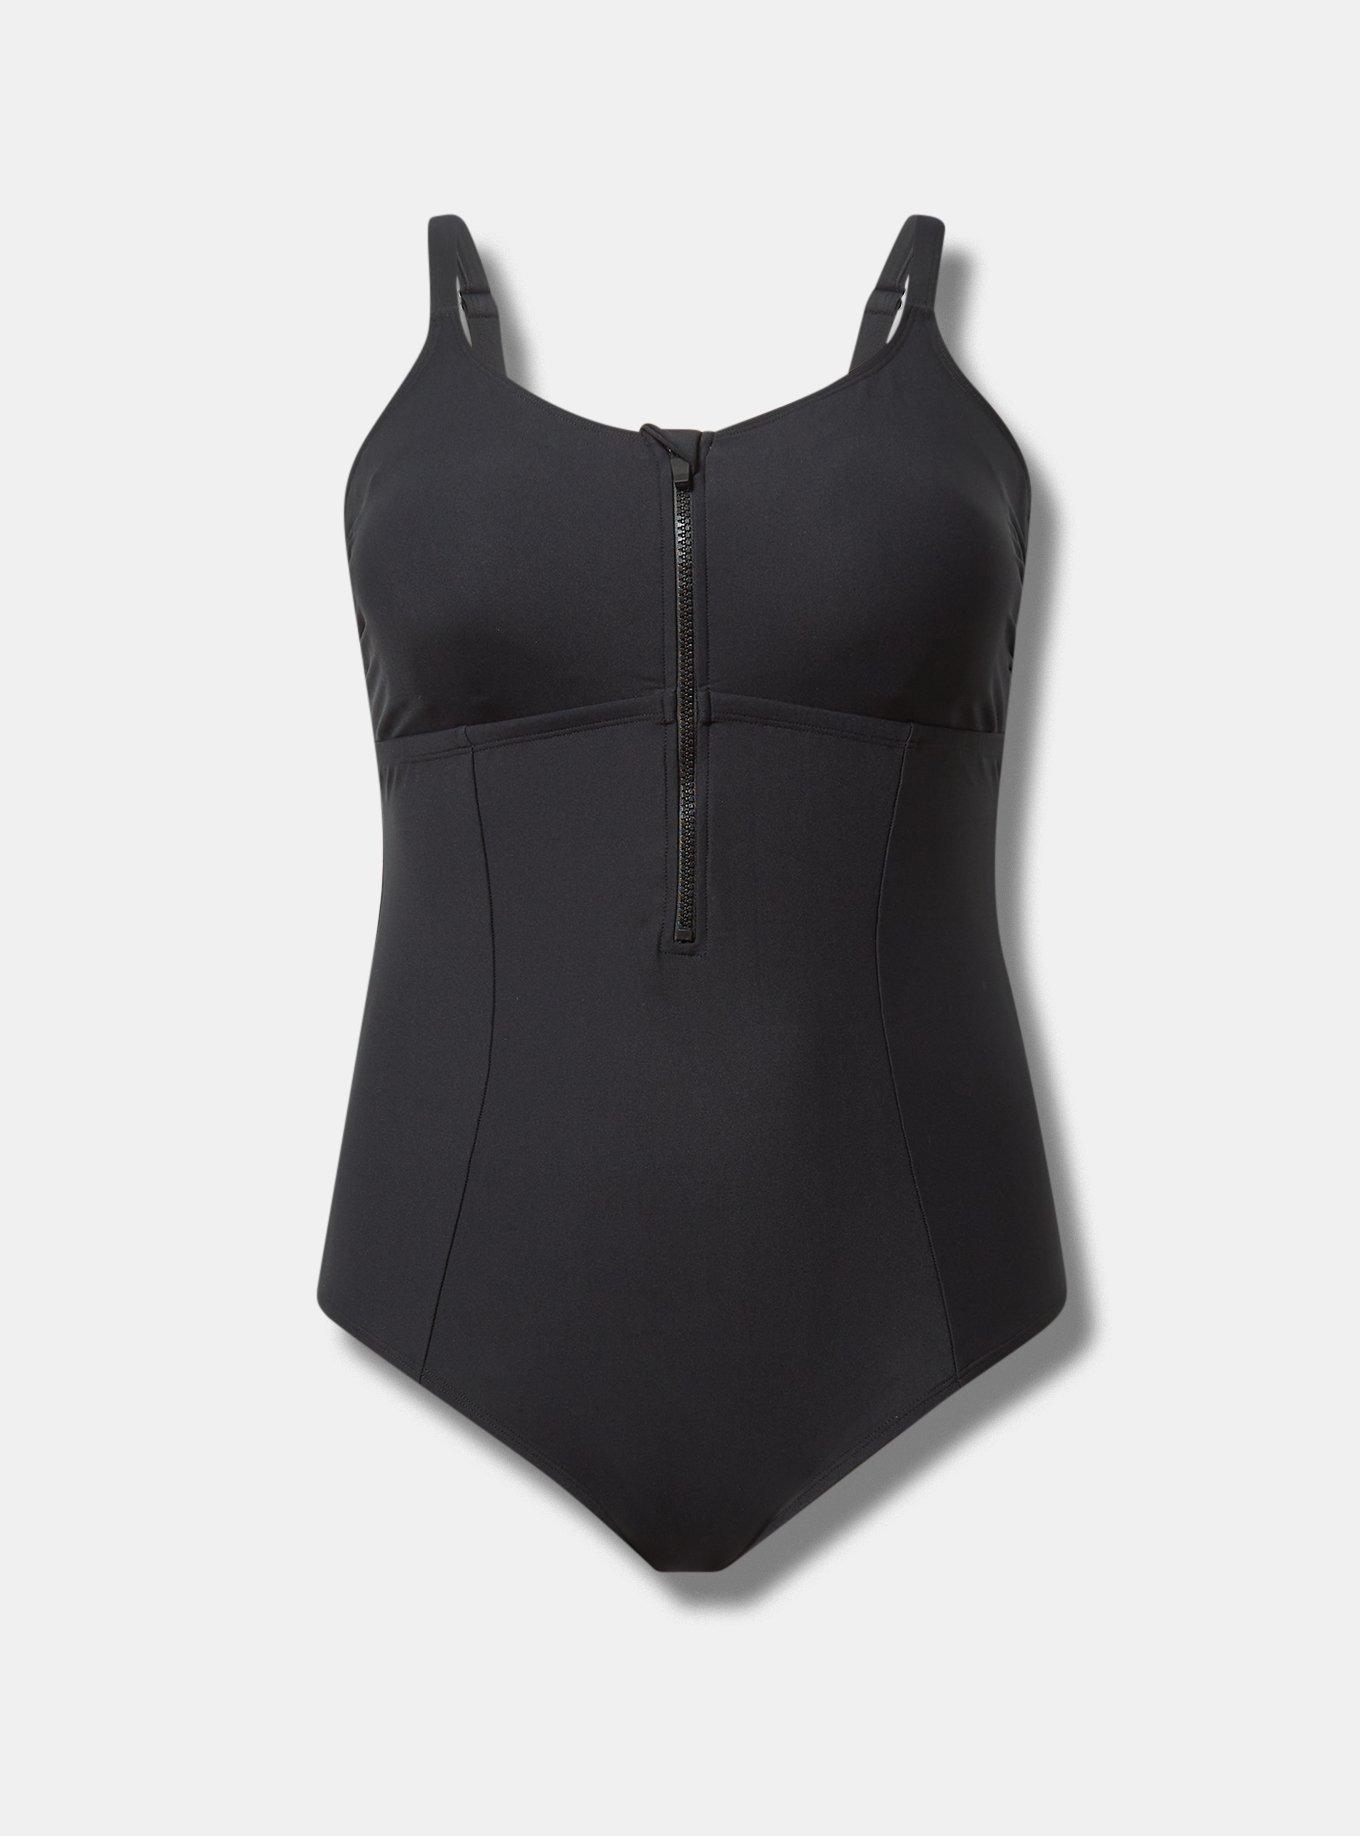 Where can I get sports swimsuits that have concealed underwire and come in bra  sizes and/or plus sizes, like this one by freya active? I can't seem to  find any in the